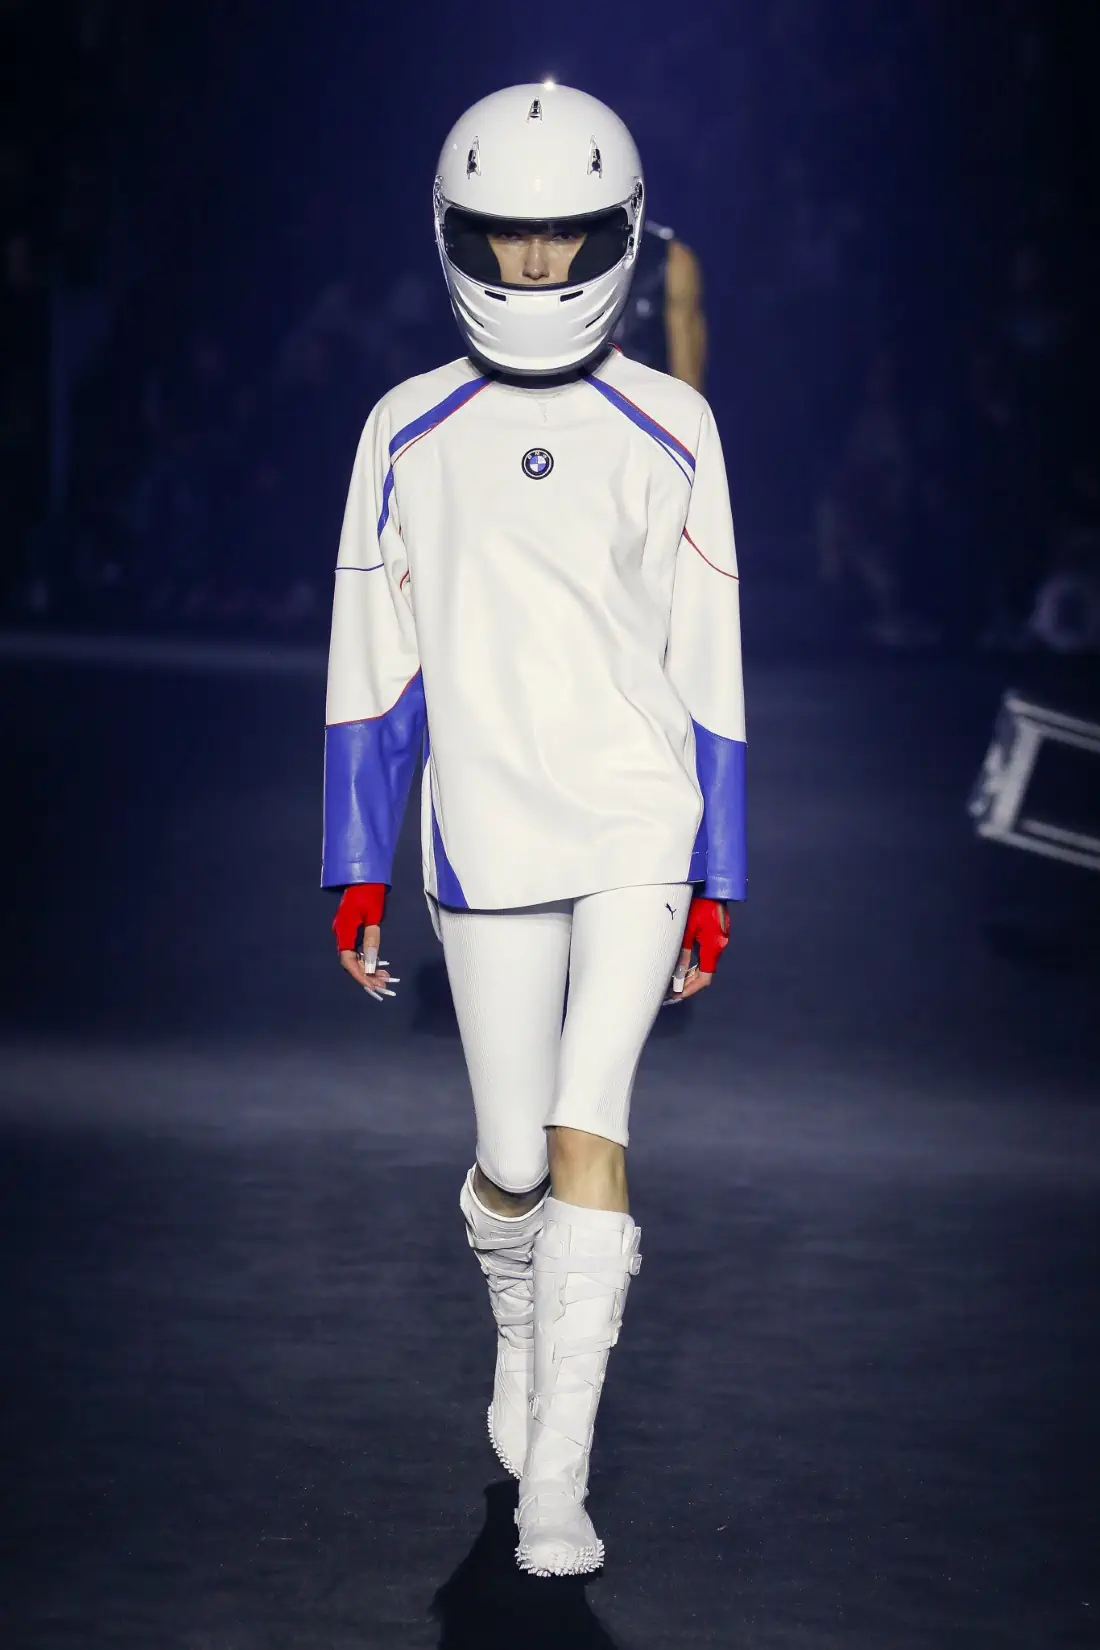 Puma's "Welcome To The Amazing Mostro Show" lights up New York Fashion Week